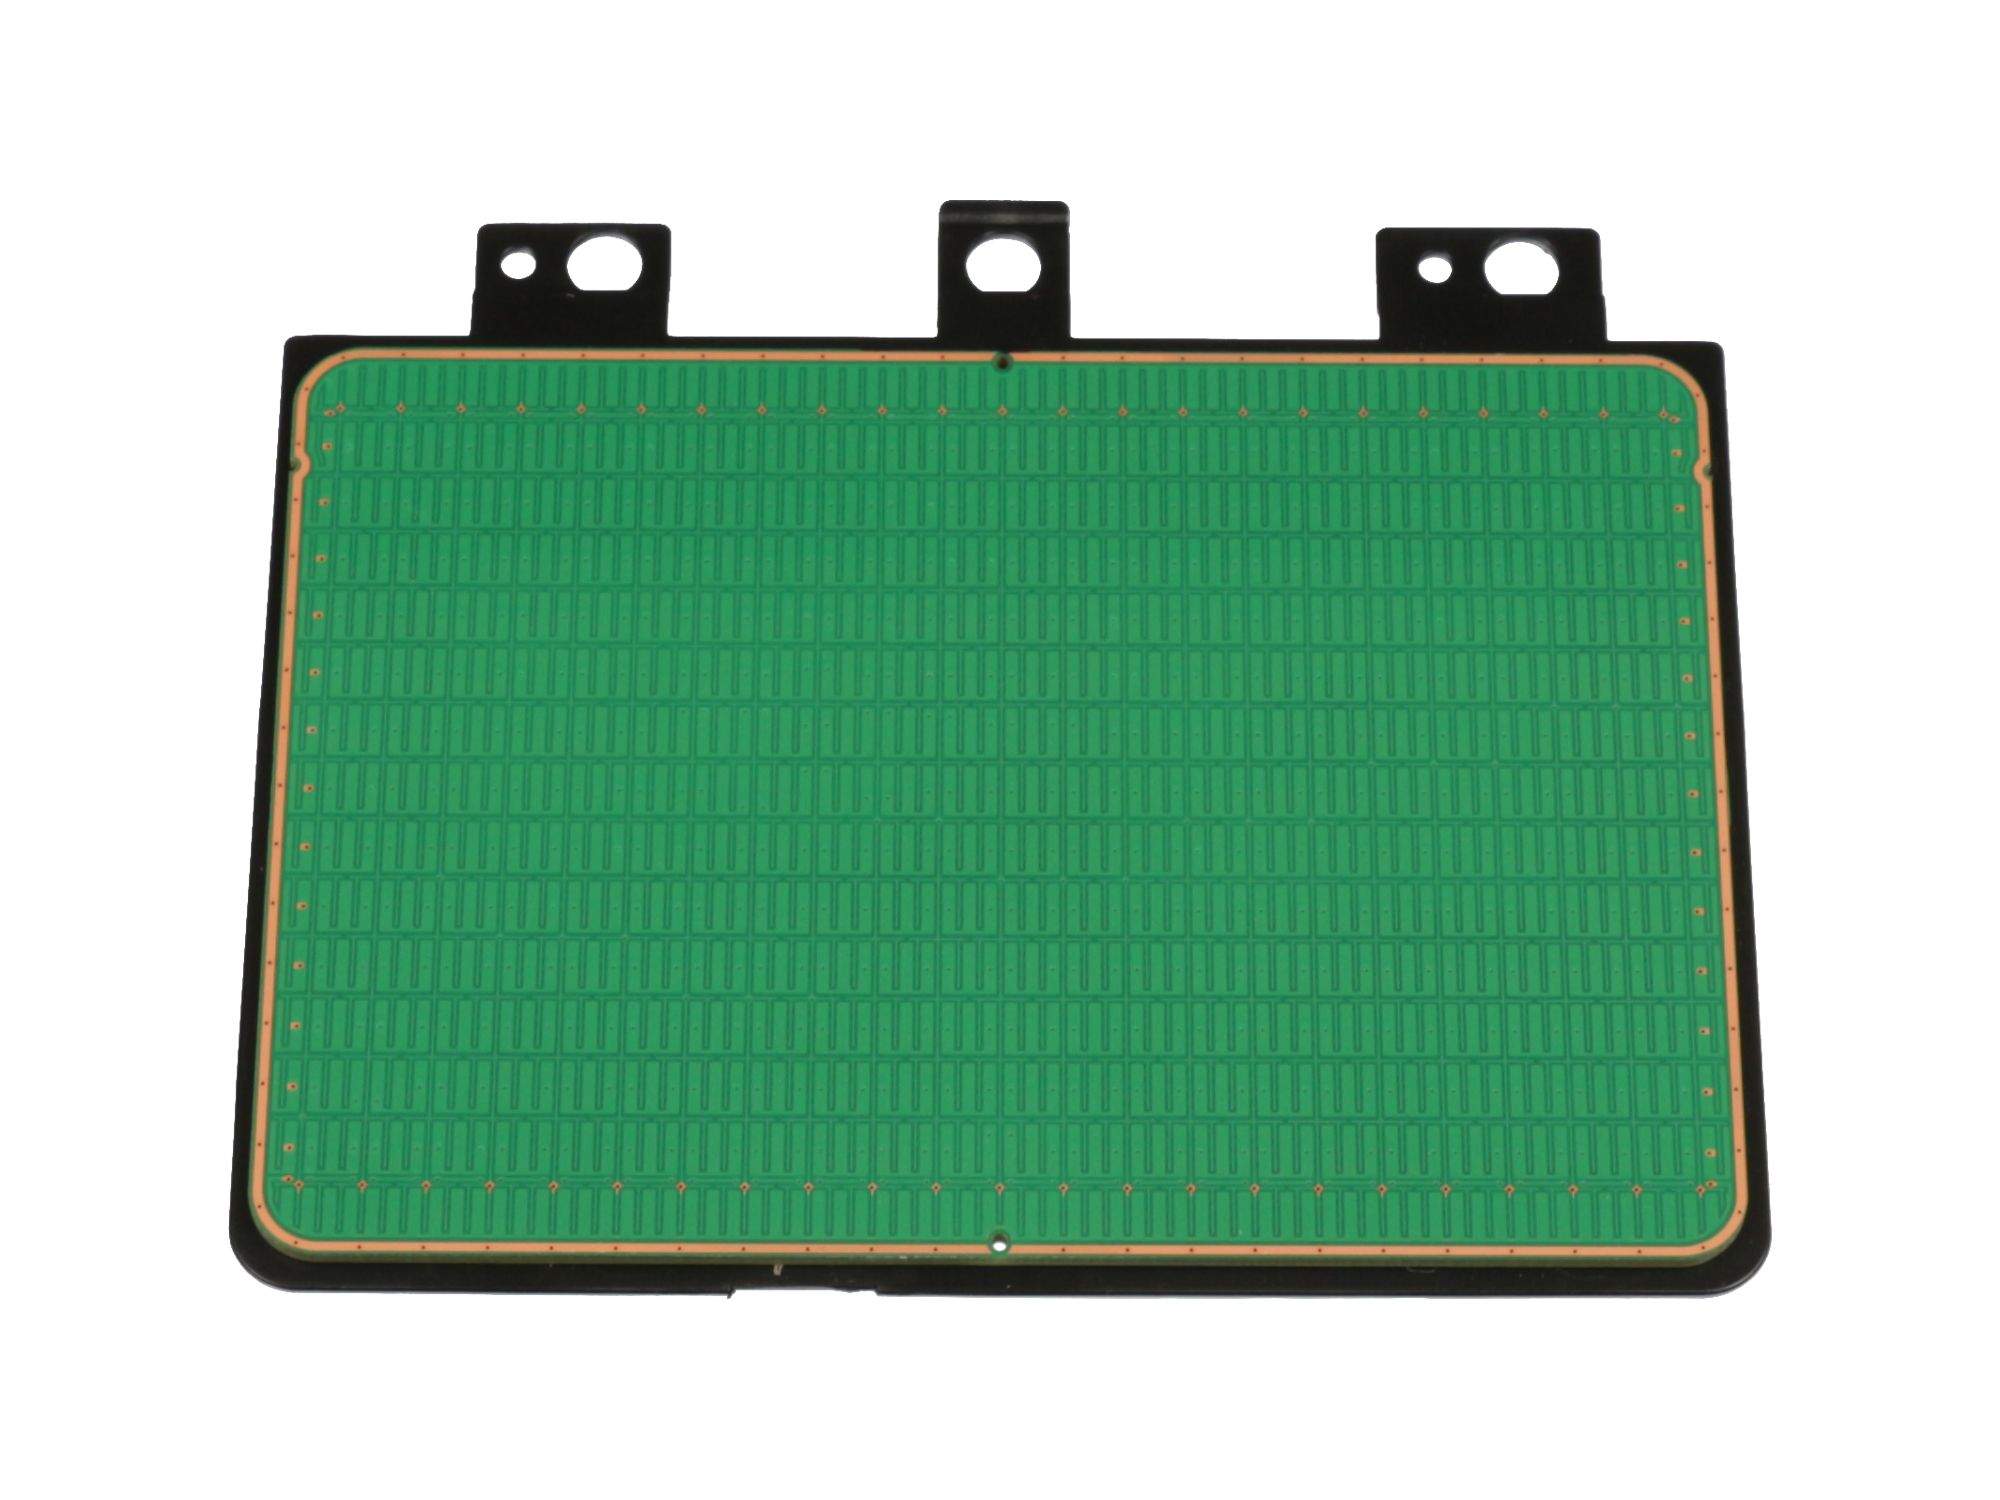 ASUS Touchpad Module